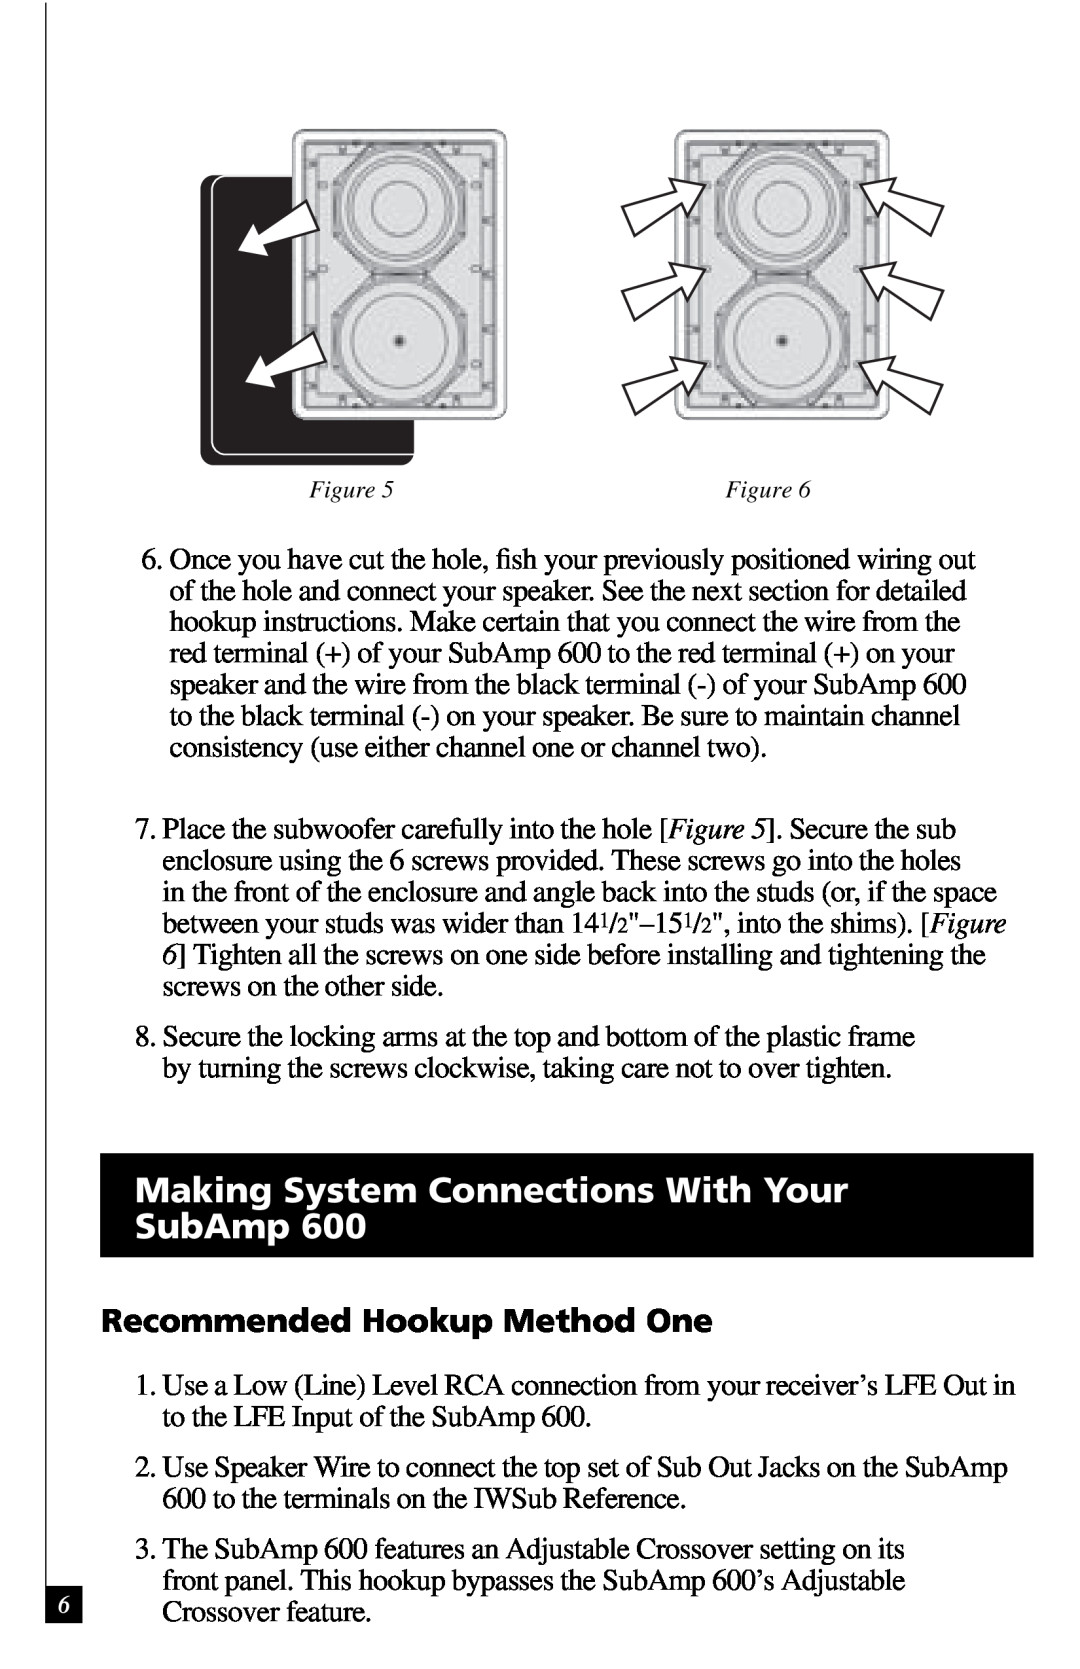 Definitive Technology 600 owner manual Making System Connections With Your SubAmp, Recommended Hookup Method One 